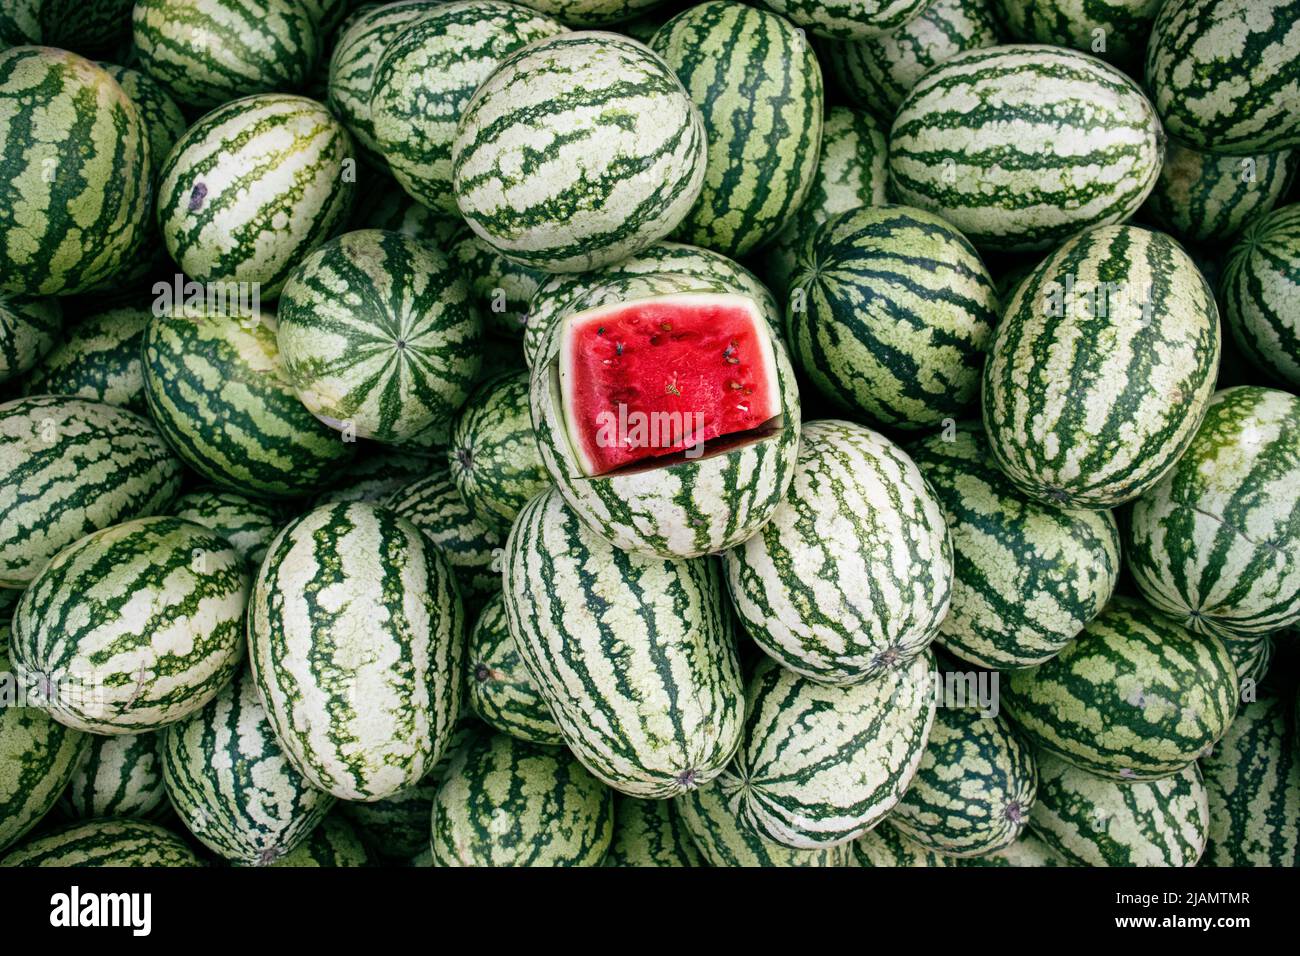 Green watermelons with red inside Stock Photo